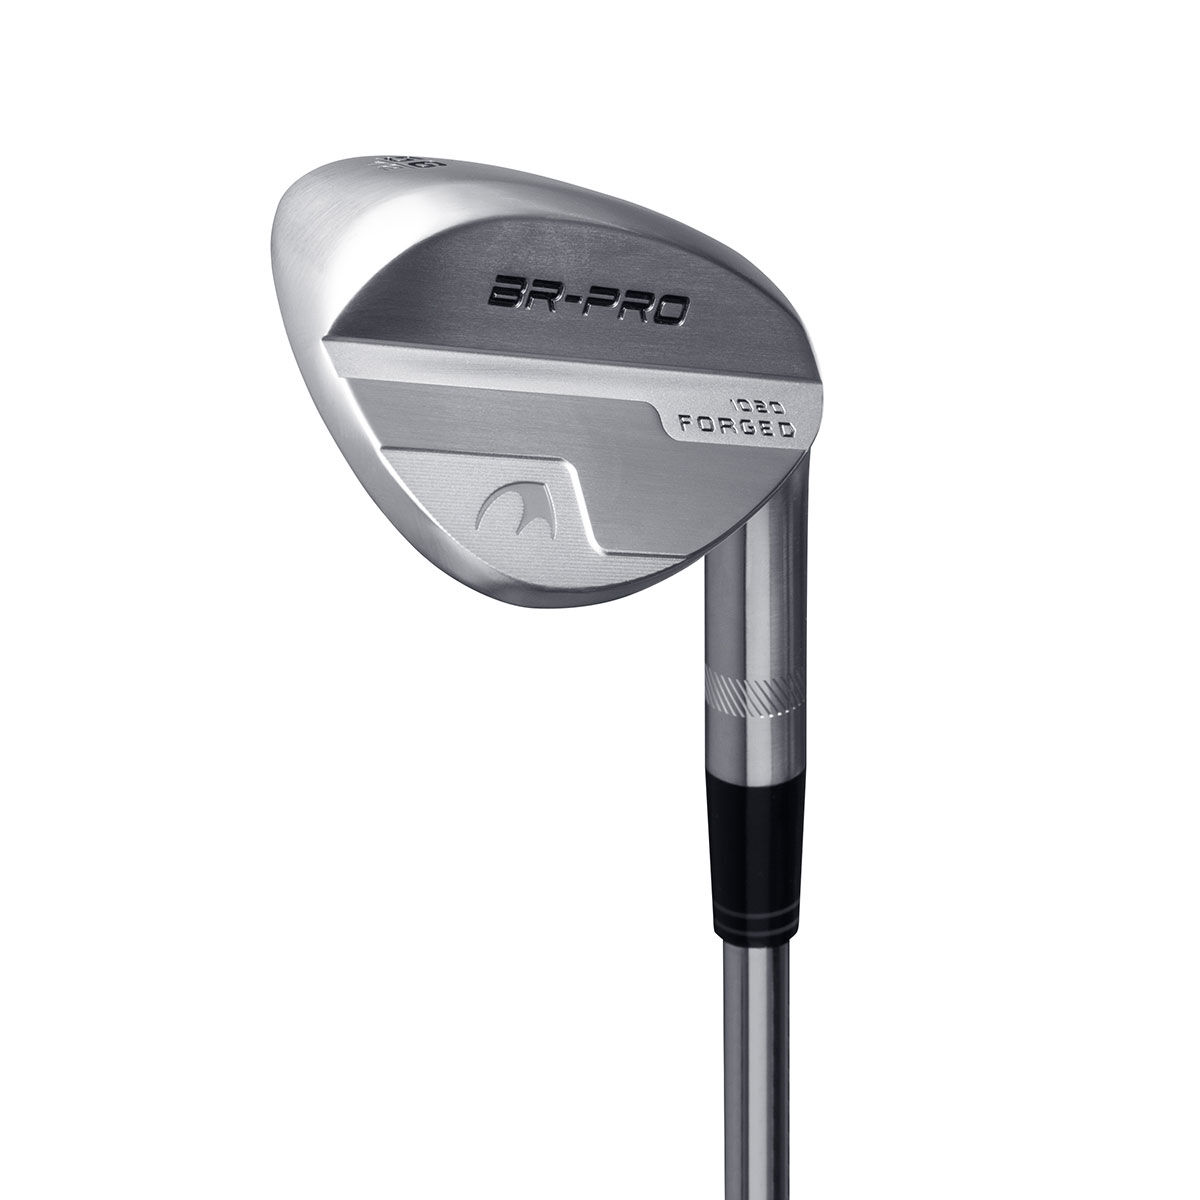 Benross Mens, Silver Br-Pro Forged Golf Wedge, Right Hand, 52deg, Standard, Steel, Size: 52" | American Golf